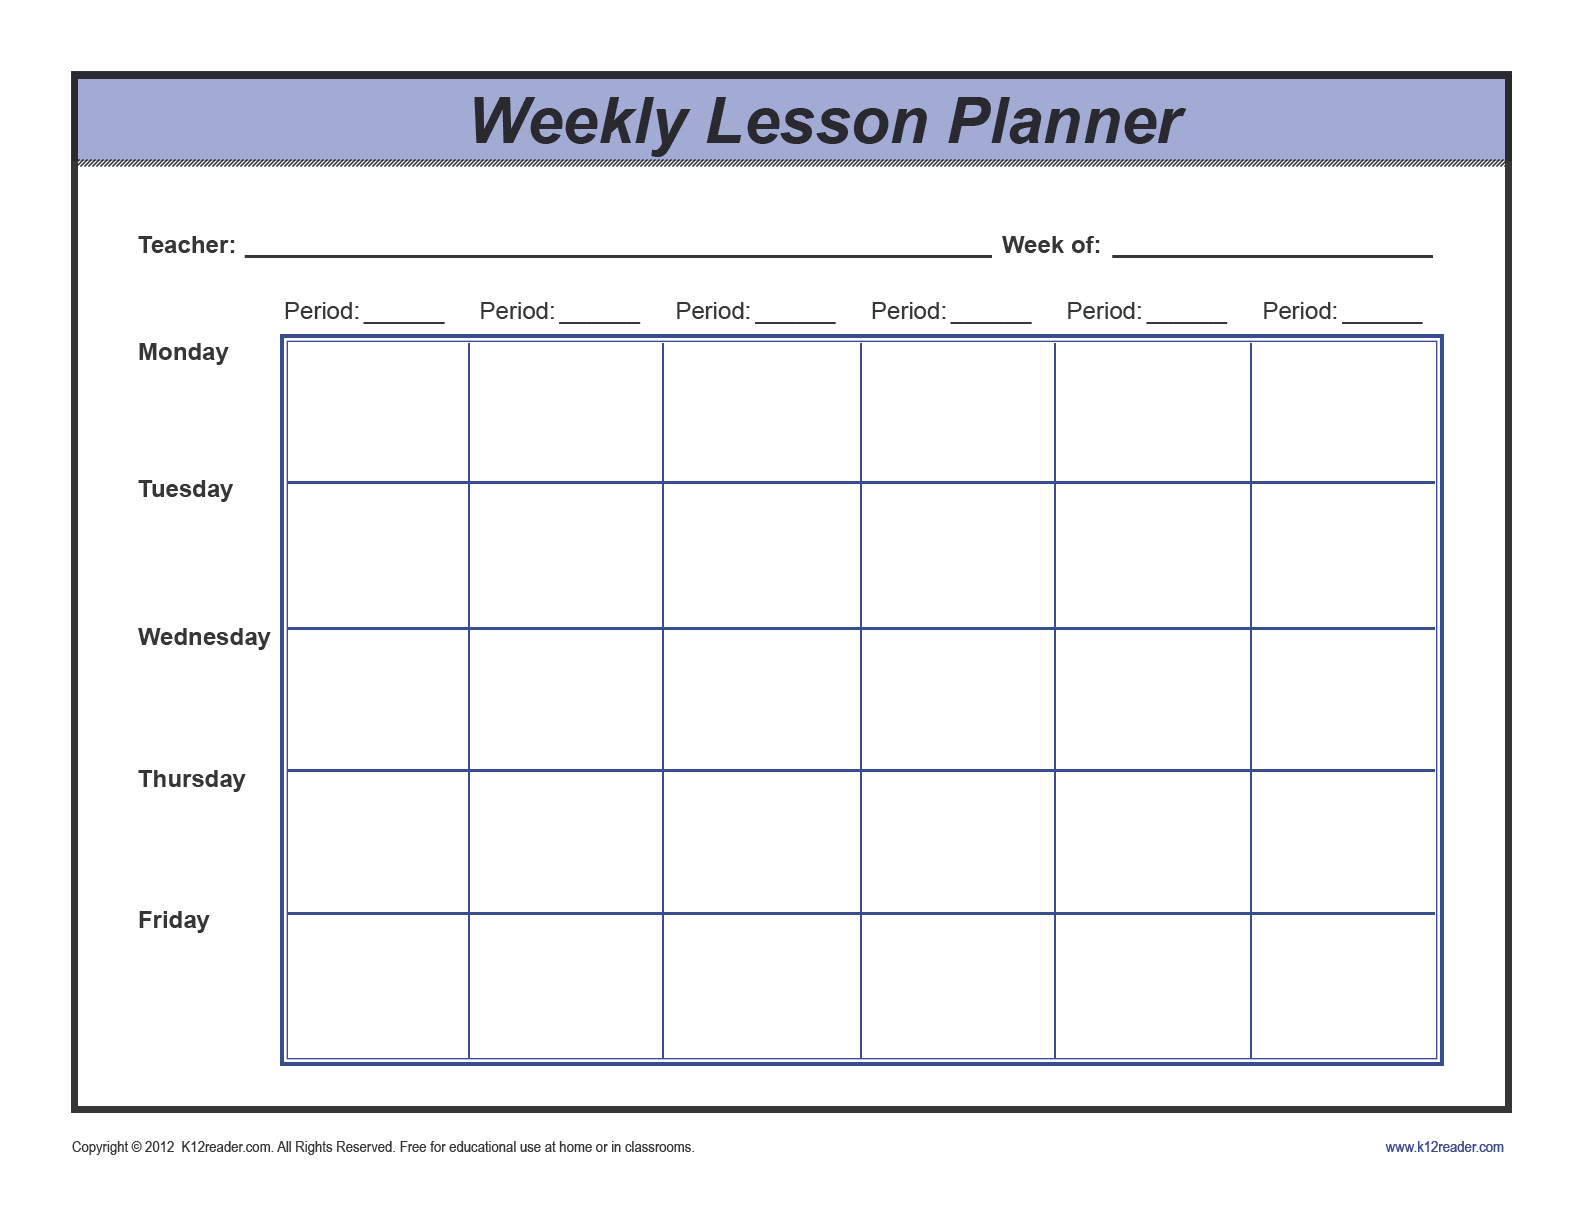 Free Preschool Weekly Lesson Plans Download Weekly Lesson Plan Template Preschool